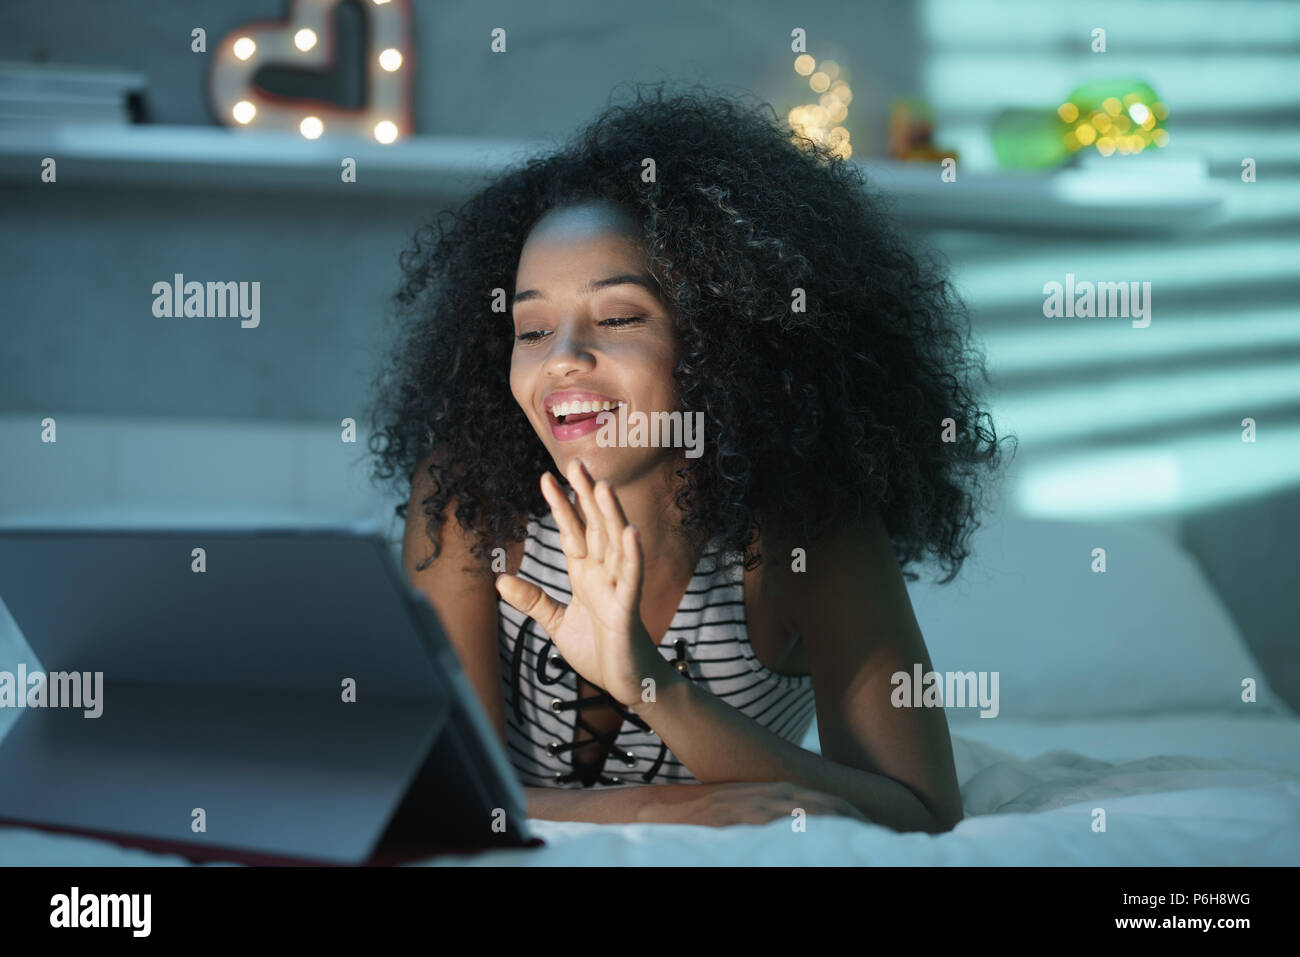 Black Woman Using Webcam And PC For Video Chat Stock Photo - Alamy